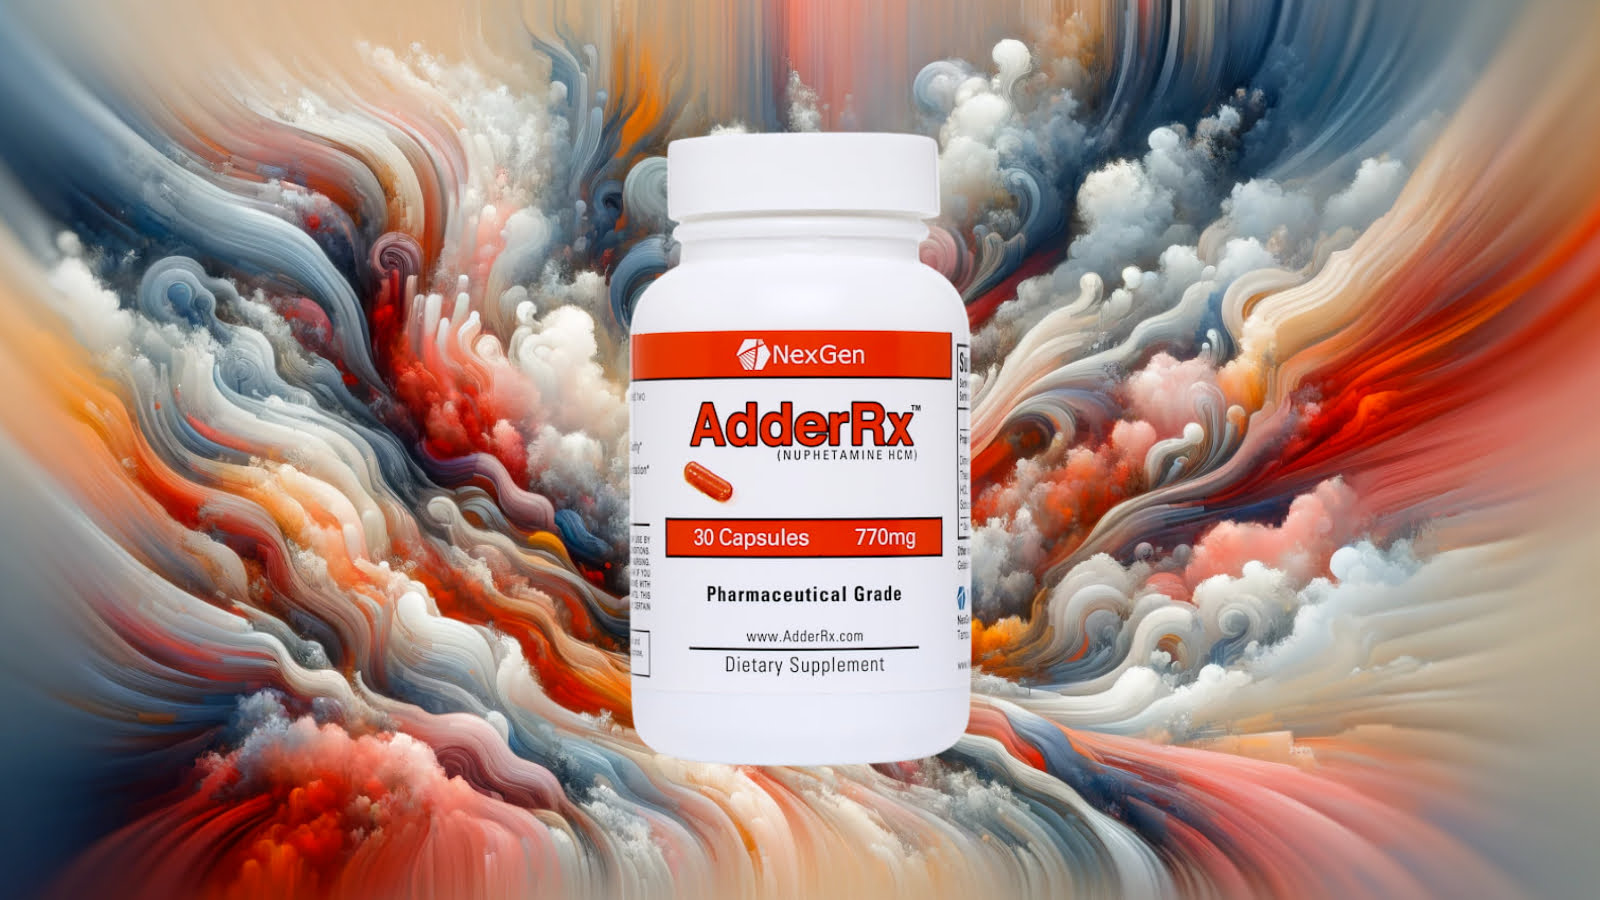 Article discussing the benefits, ingredients, and side effects of AdderRx for cognitive enhancement.